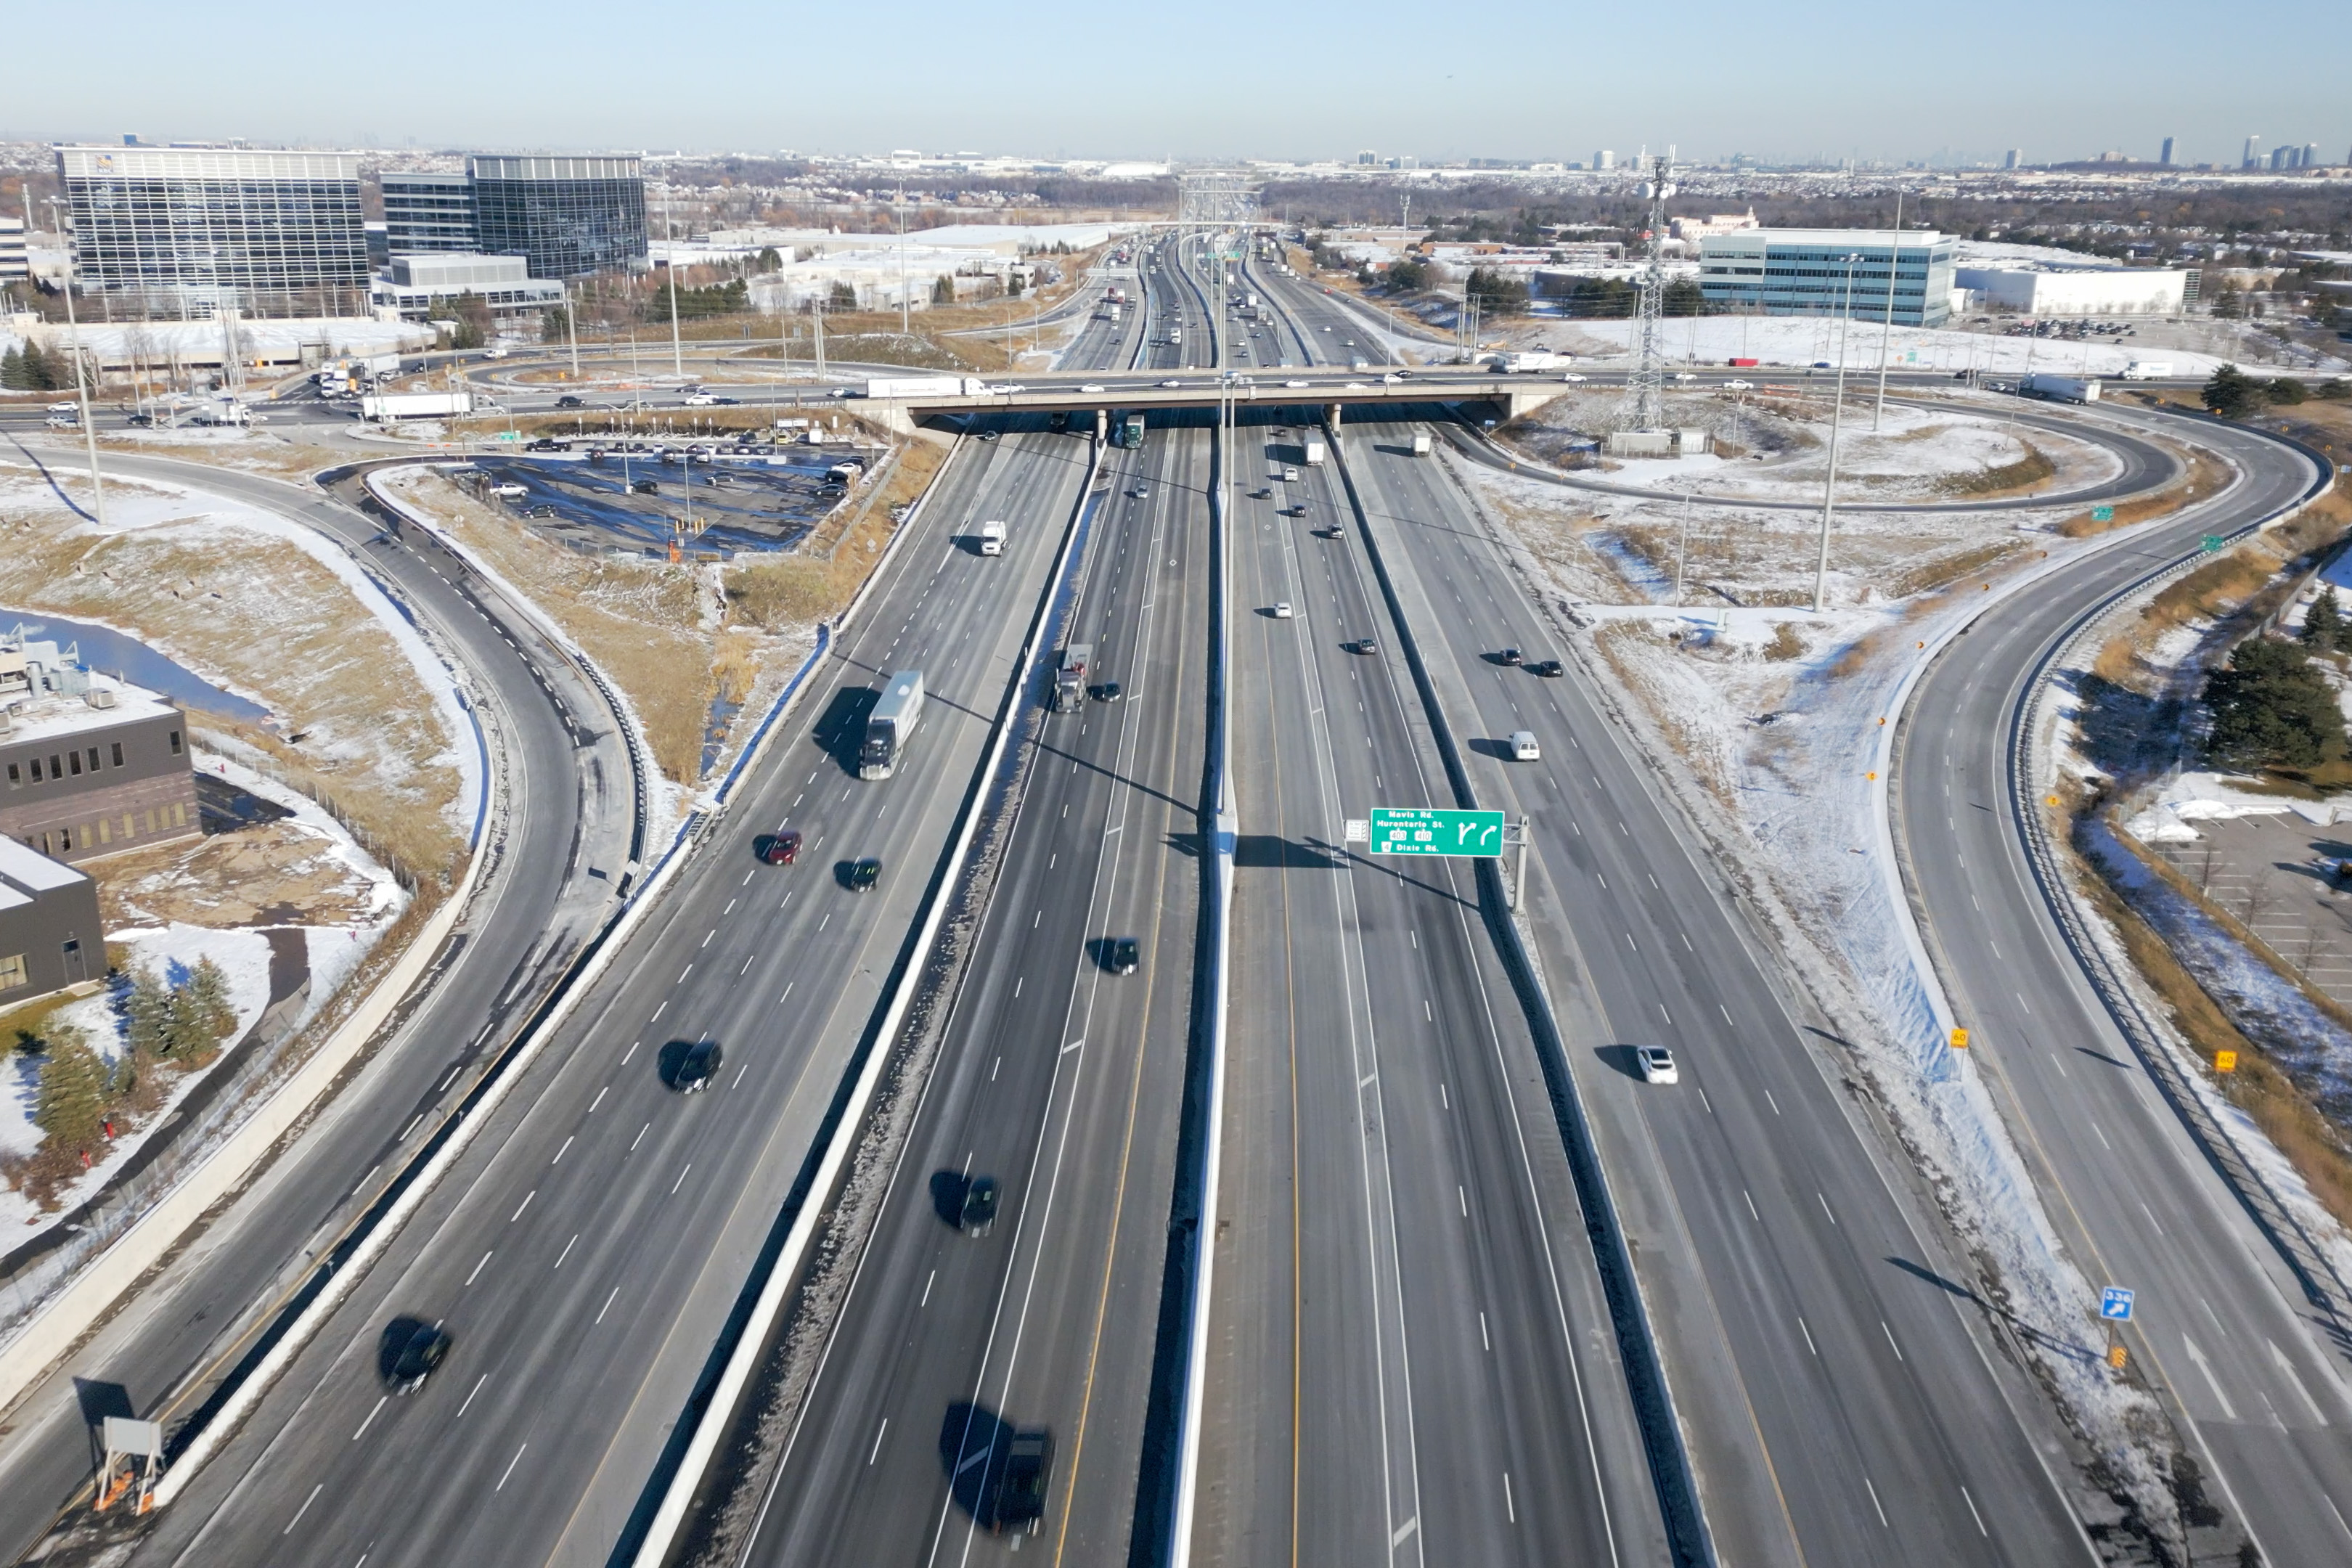 All lanes open! At the Mississauga Road interchange.